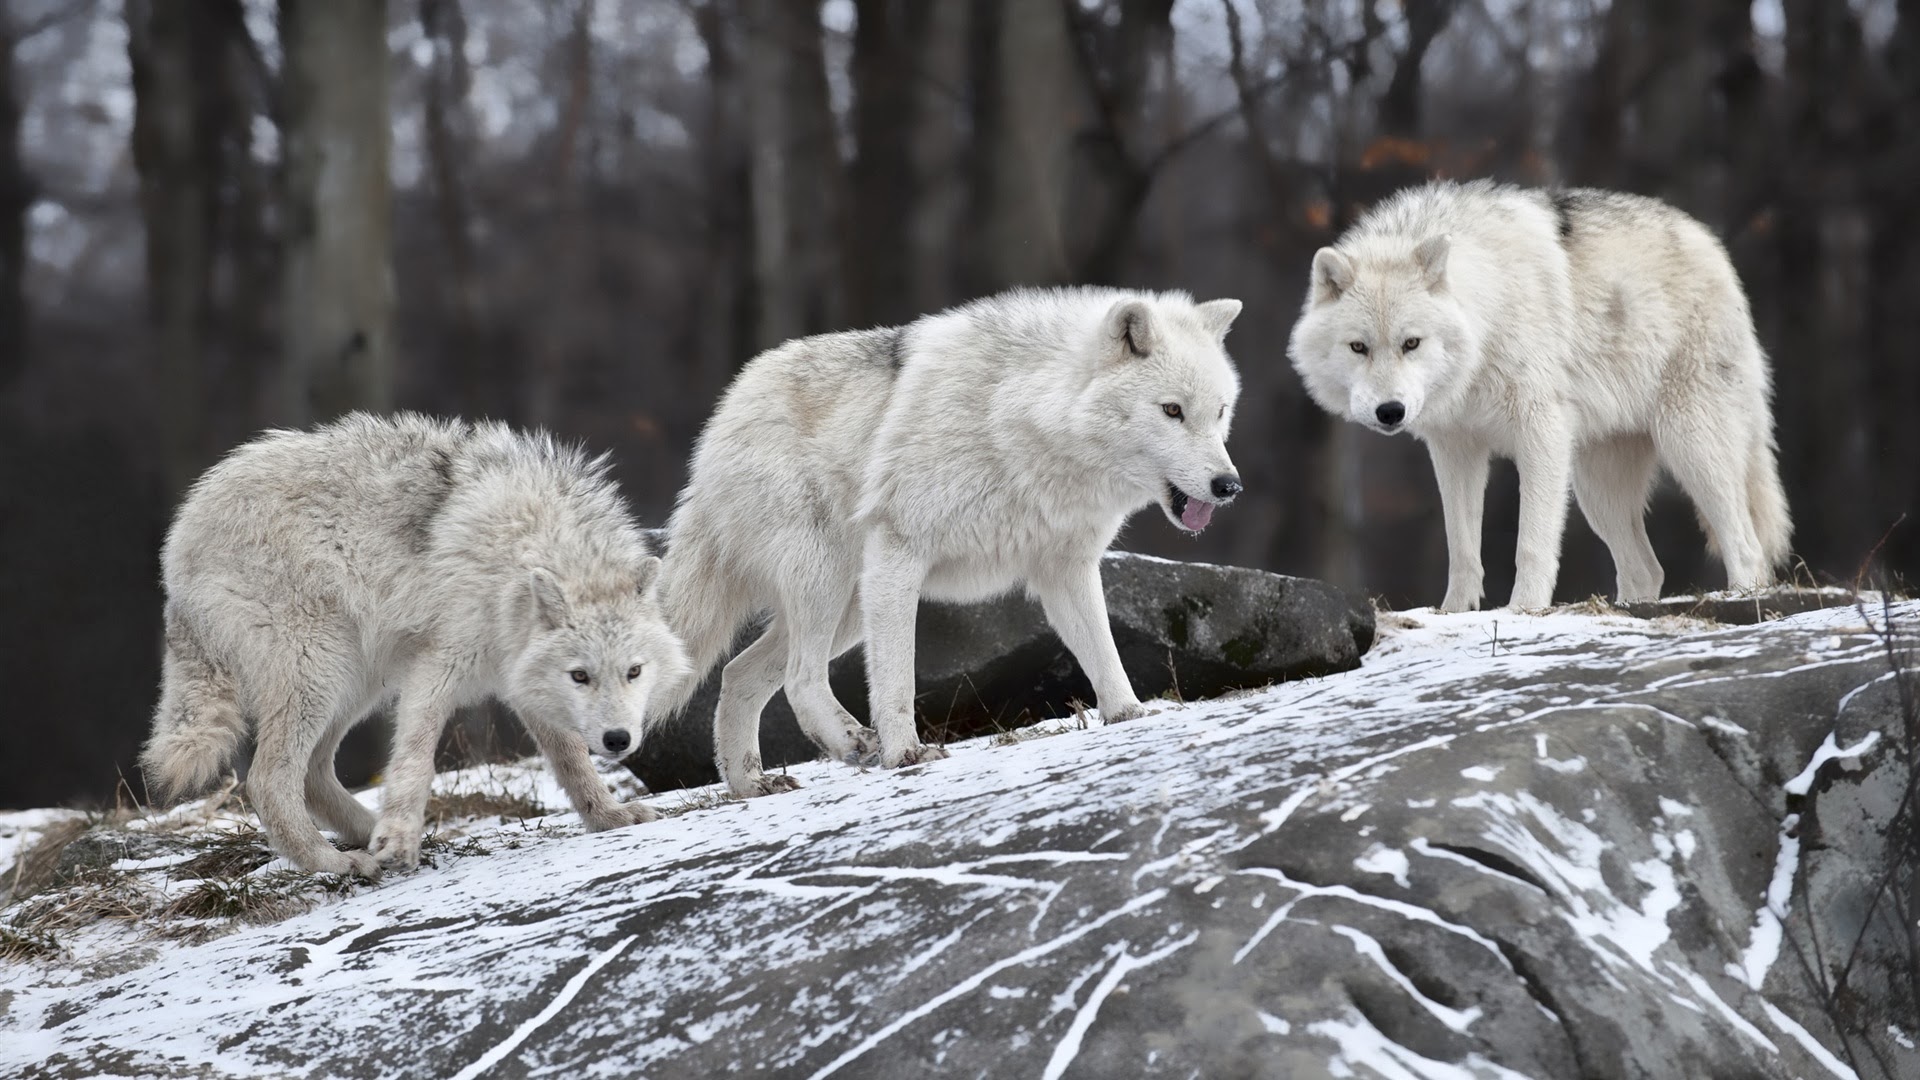 Winter Wallpaper Background Wolves Hungry Uql7sdgvmxi